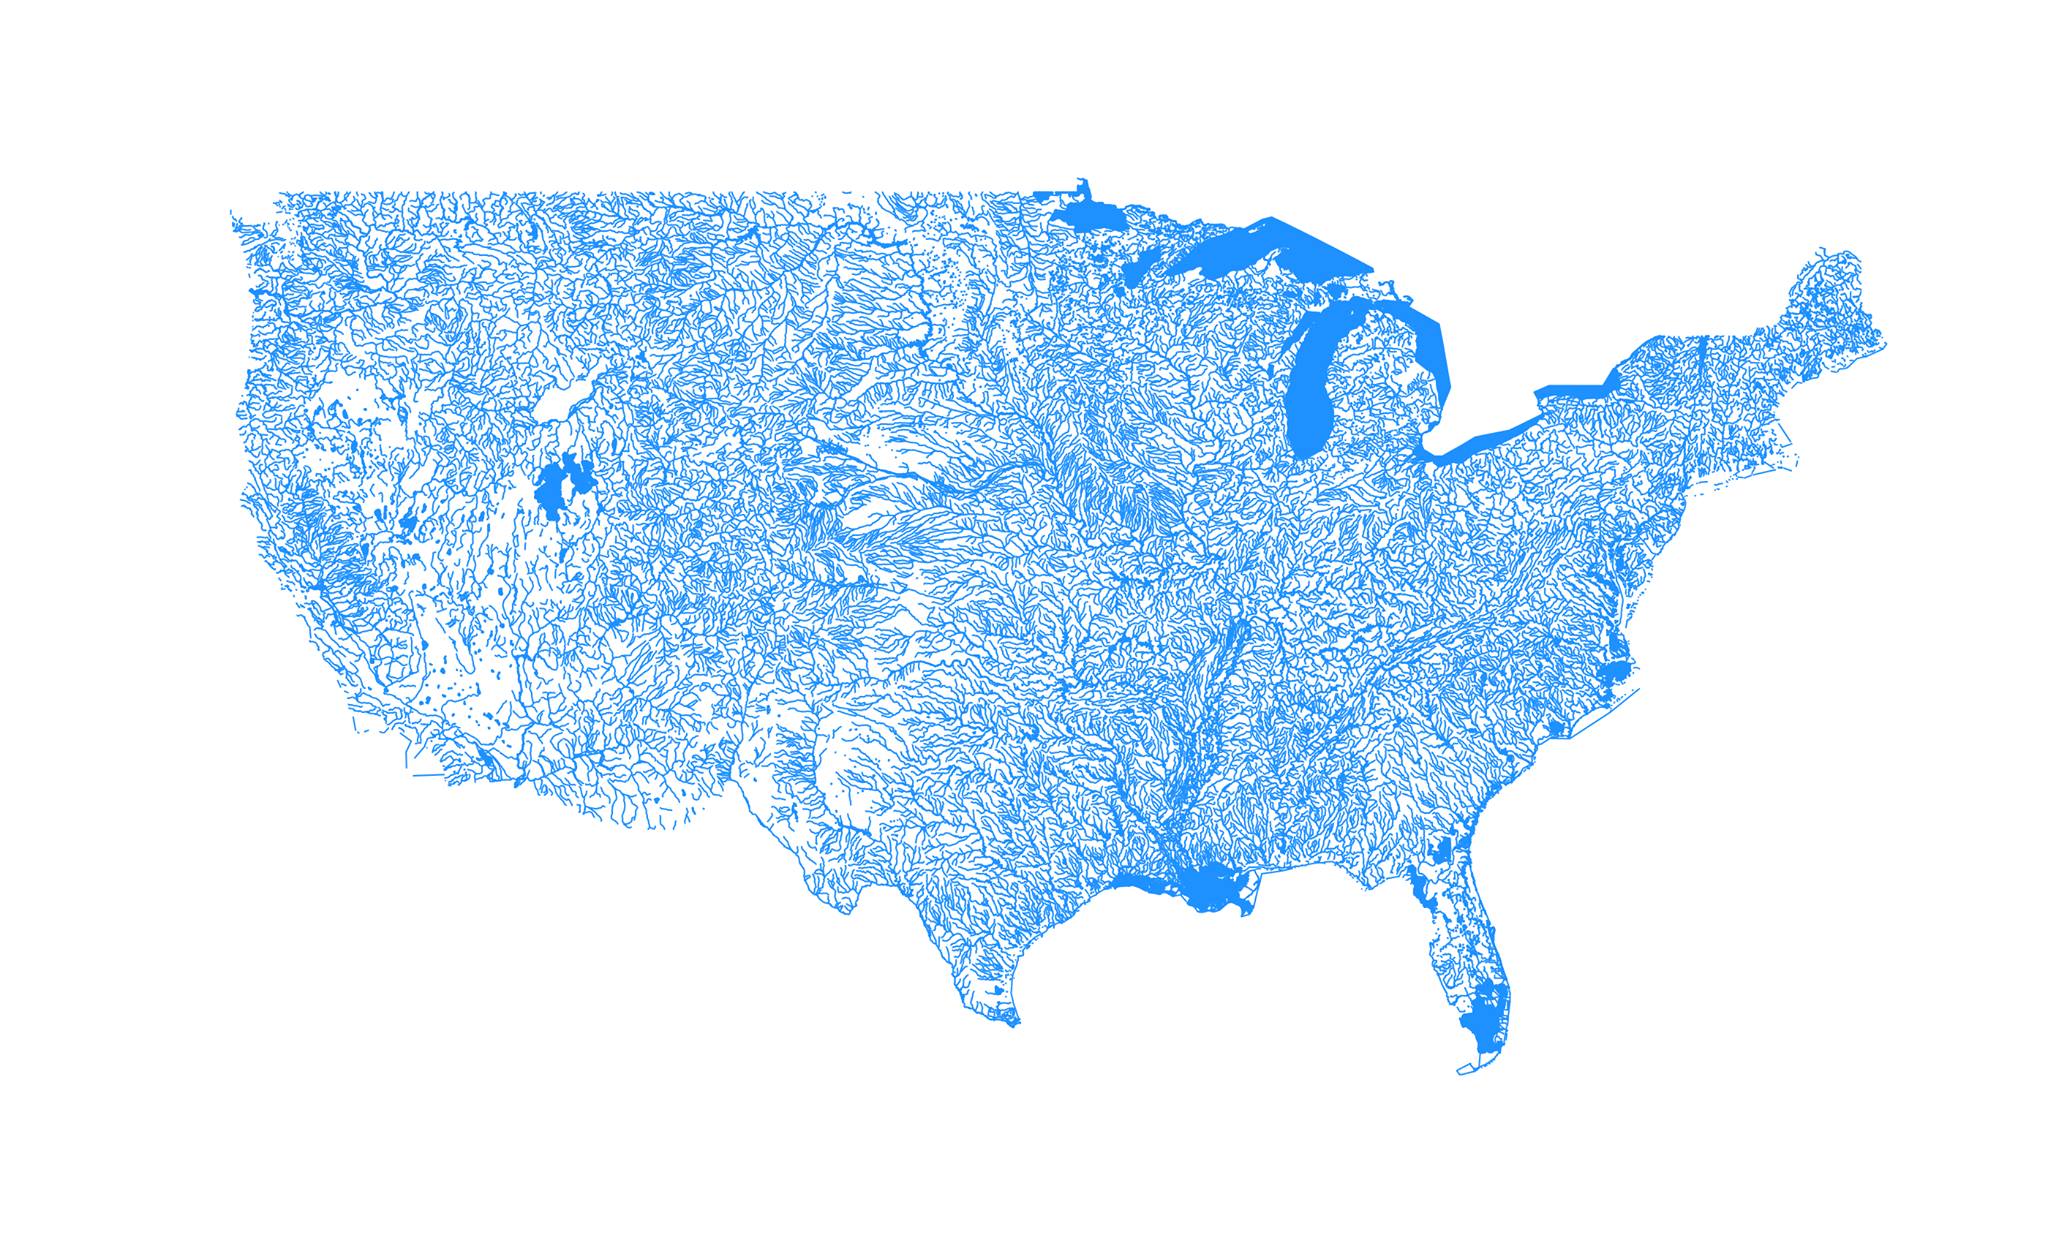 r/dataisbeautiful - I made a map of all the U.S. waterbodies using R [OC]